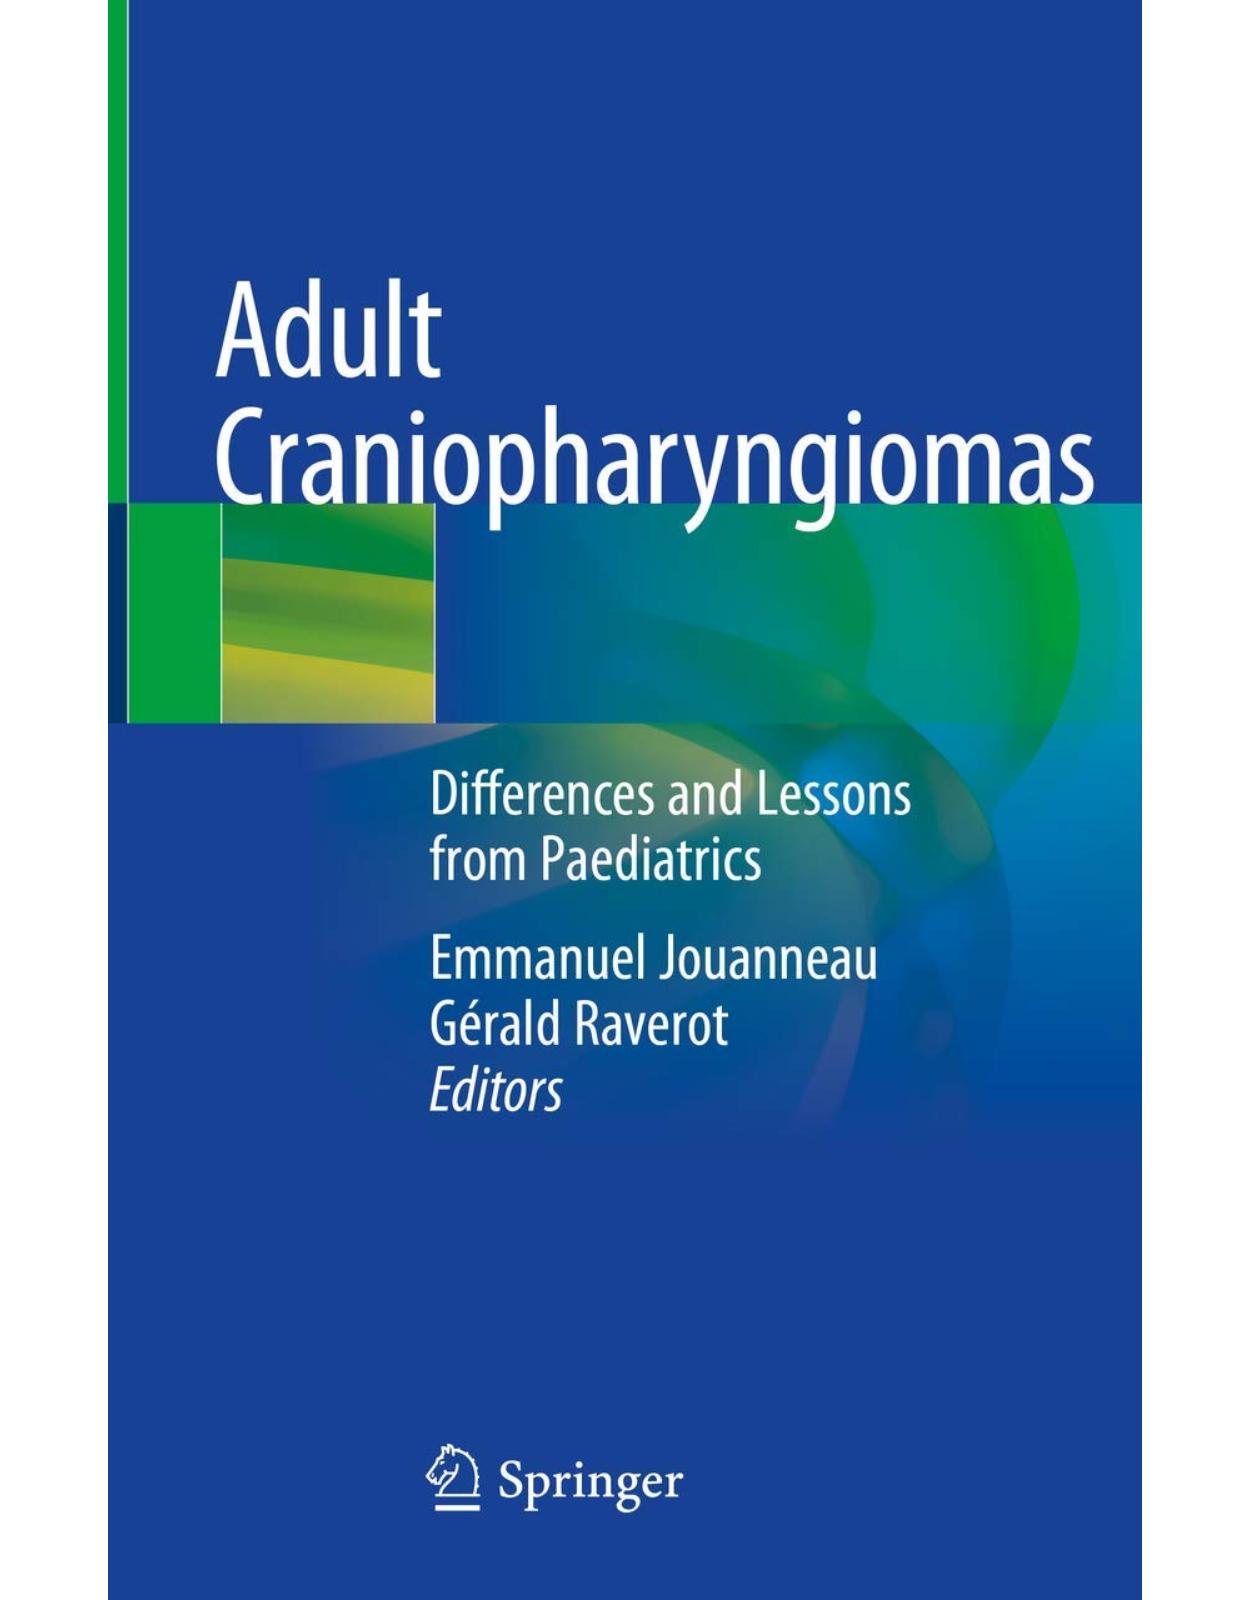 Adult Craniopharyngiomas. Differences and Lessons from Paediatrics